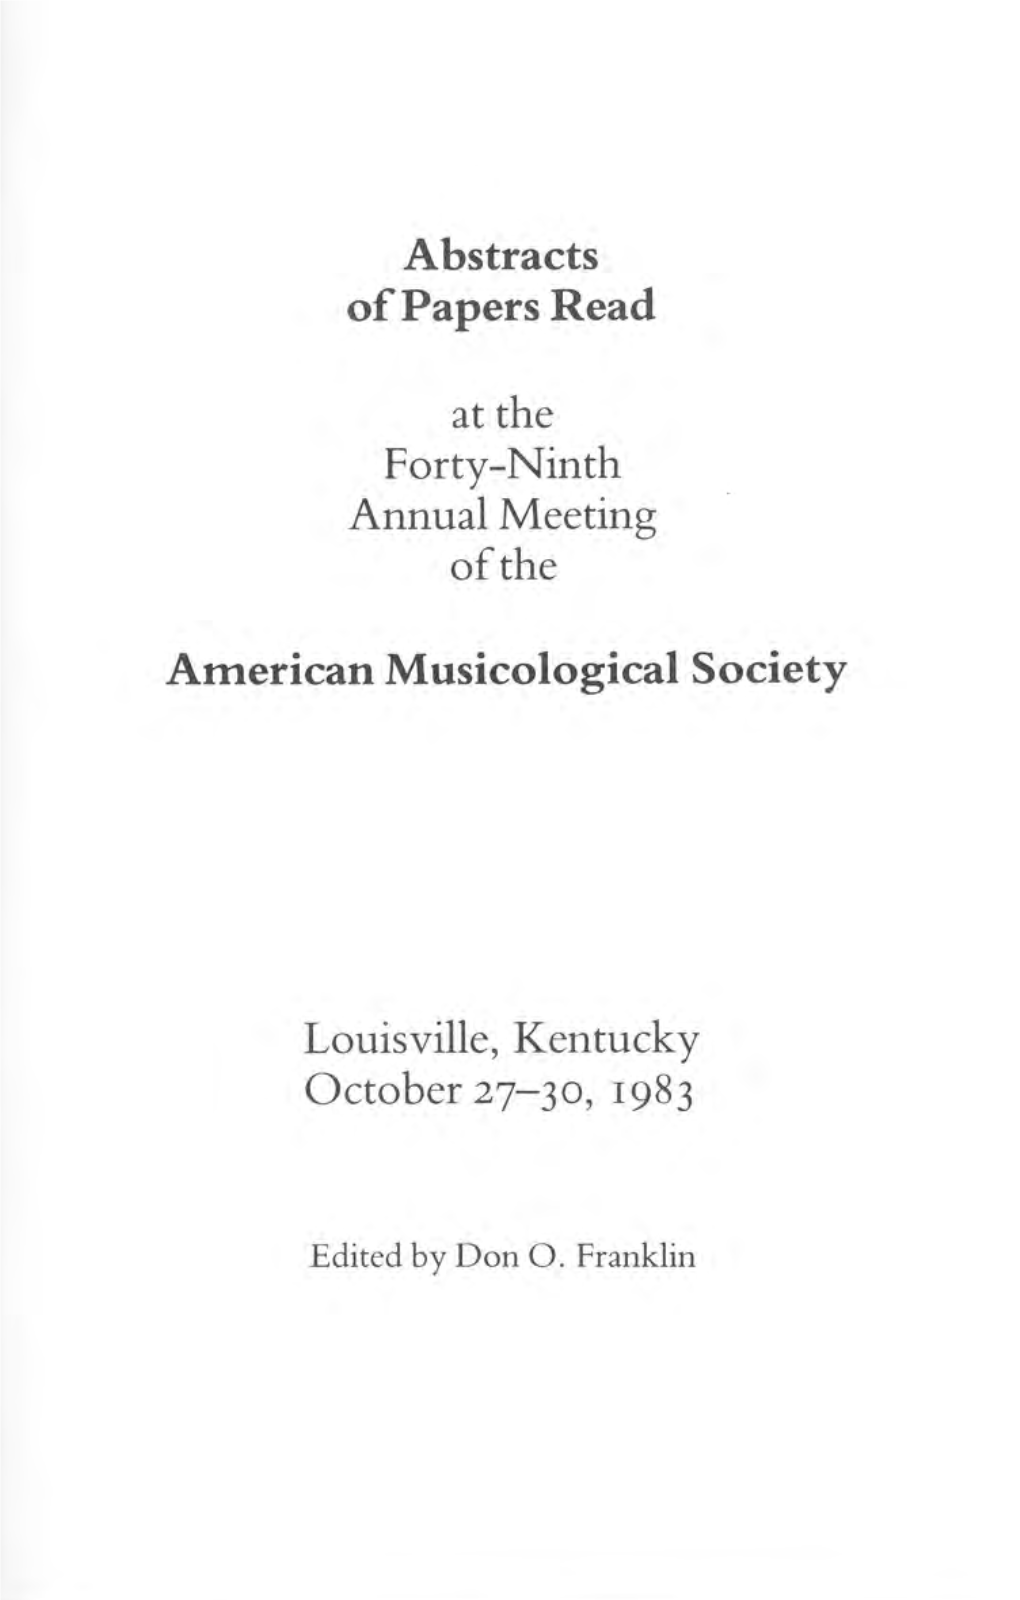 Abstracts of Papers Read